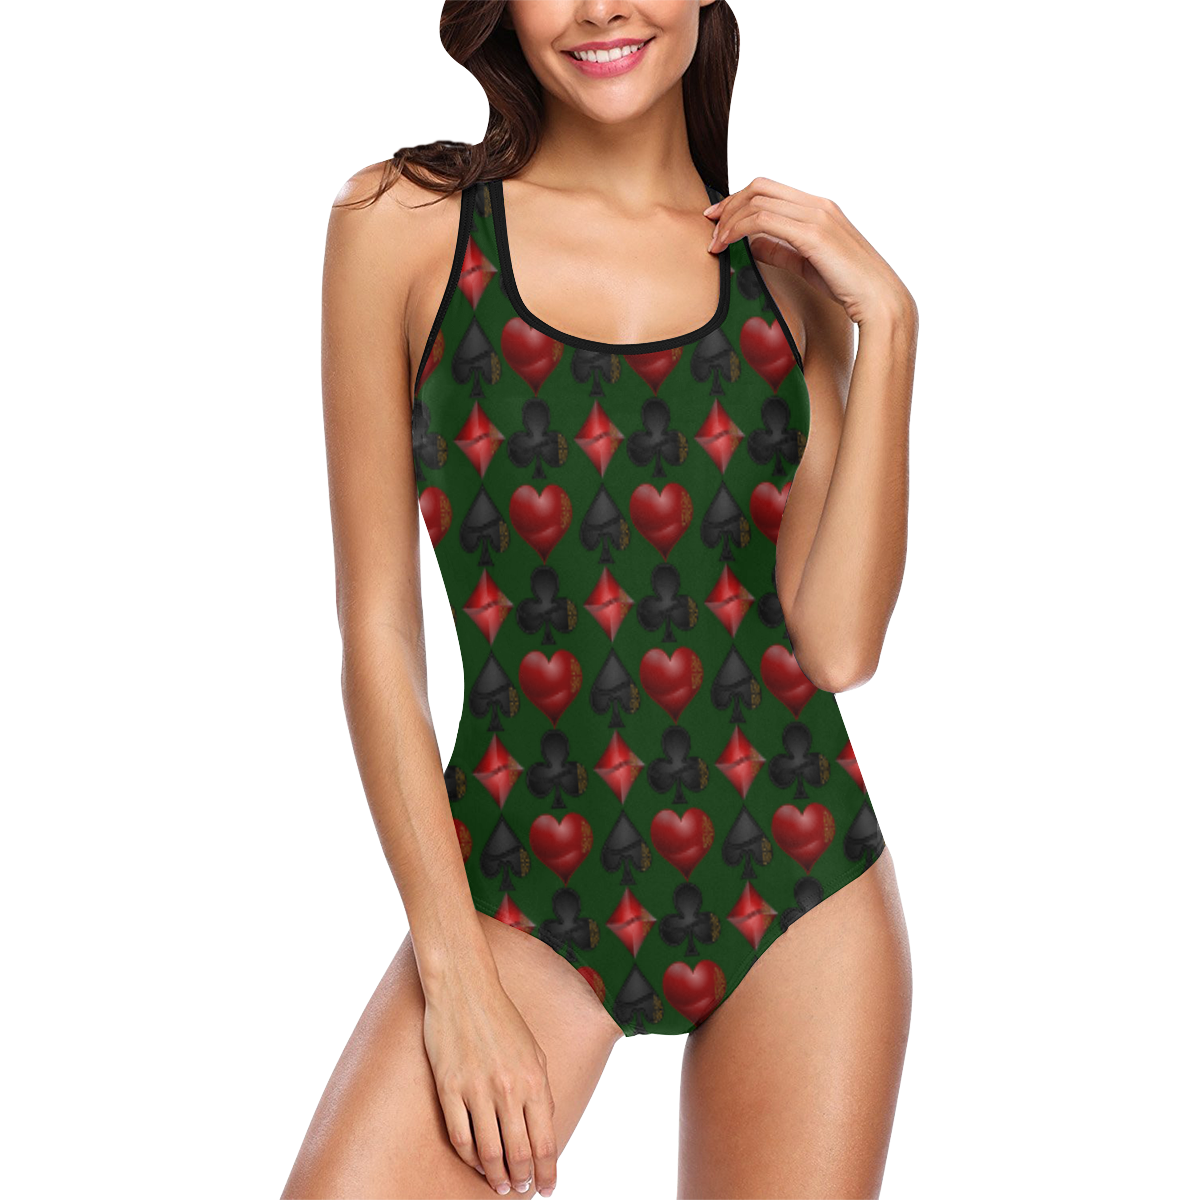 Las Vegas Black and Red Casino Poker Card Shapes on Green Vest One Piece Swimsuit (Model S04)